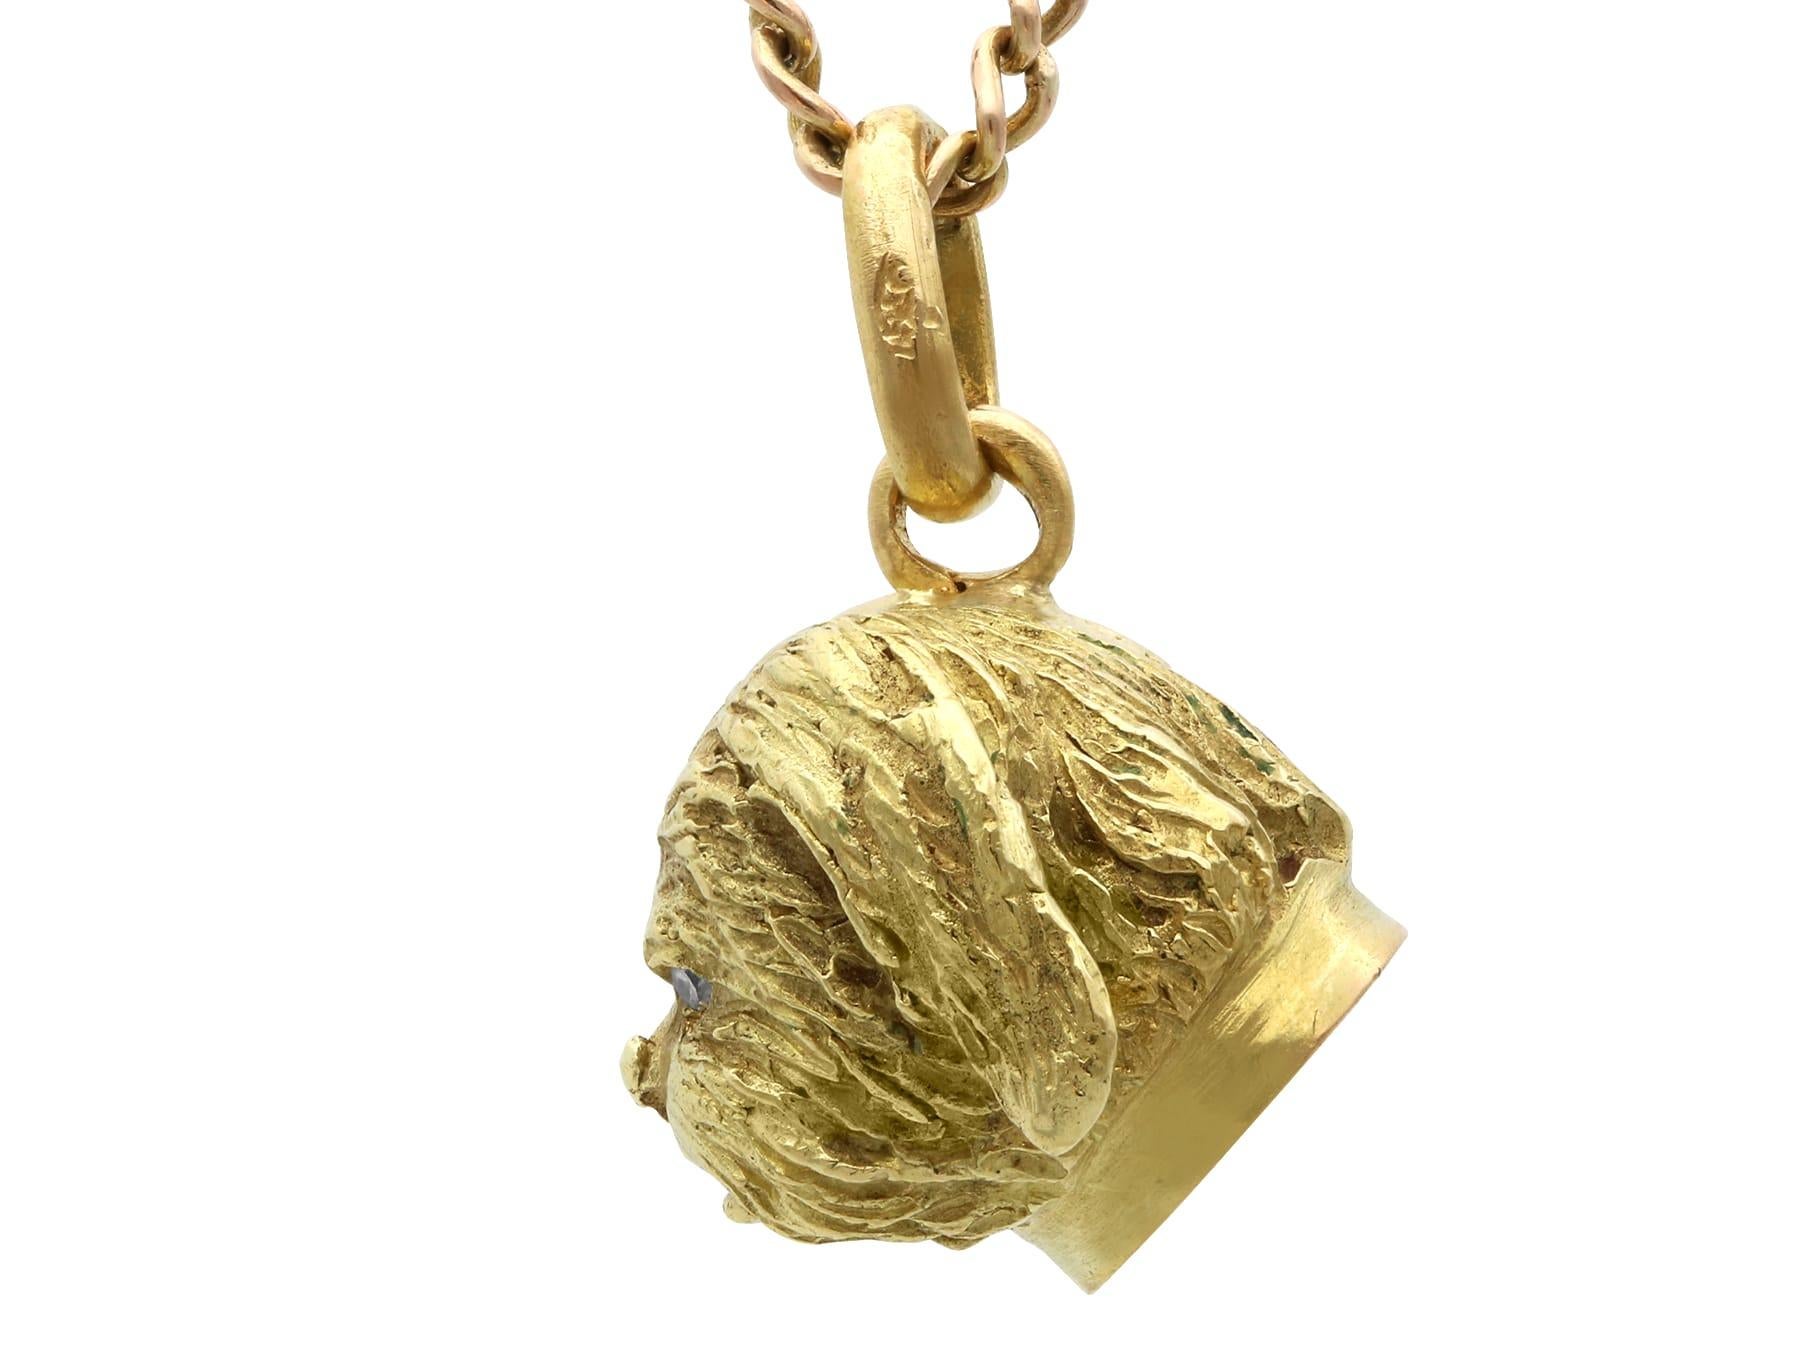 A fine and impressive antique 0.02 carat diamond and 18 karat yellow gold pendant in the form of a dog; part of our diverse animal jewellery collections.

This fine and impressive antique pendant has been crafted in 18k yellow gold.

The antique